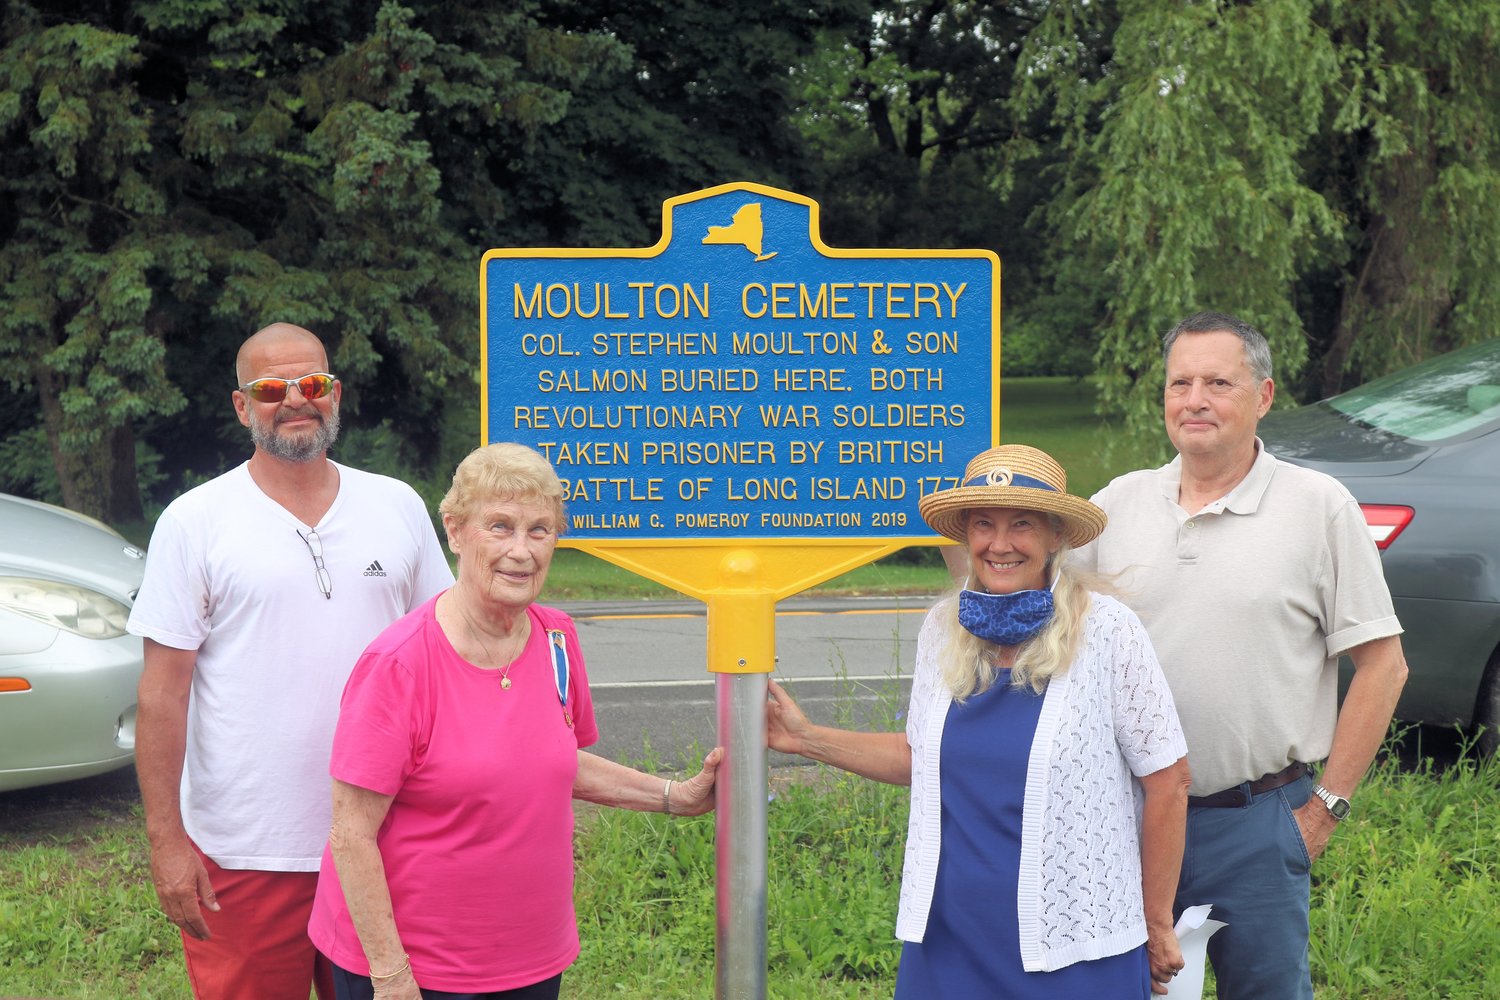 PATRIOTS HONORED — Members of the Holland Patent Chapter of the Daughters of the American Revolution and guests unveil a historical marker to honor Revolutionary War patriots Col. Stephen Moulton and his son, Salmon, during a recent ceremony.  From left: Michael Kelly, Moulton homestead owner; Beverly Seifried, DAR chapter regent; Kitty Squire, DAR chapter vice regent; and Jeff Moulton, a family descendant.